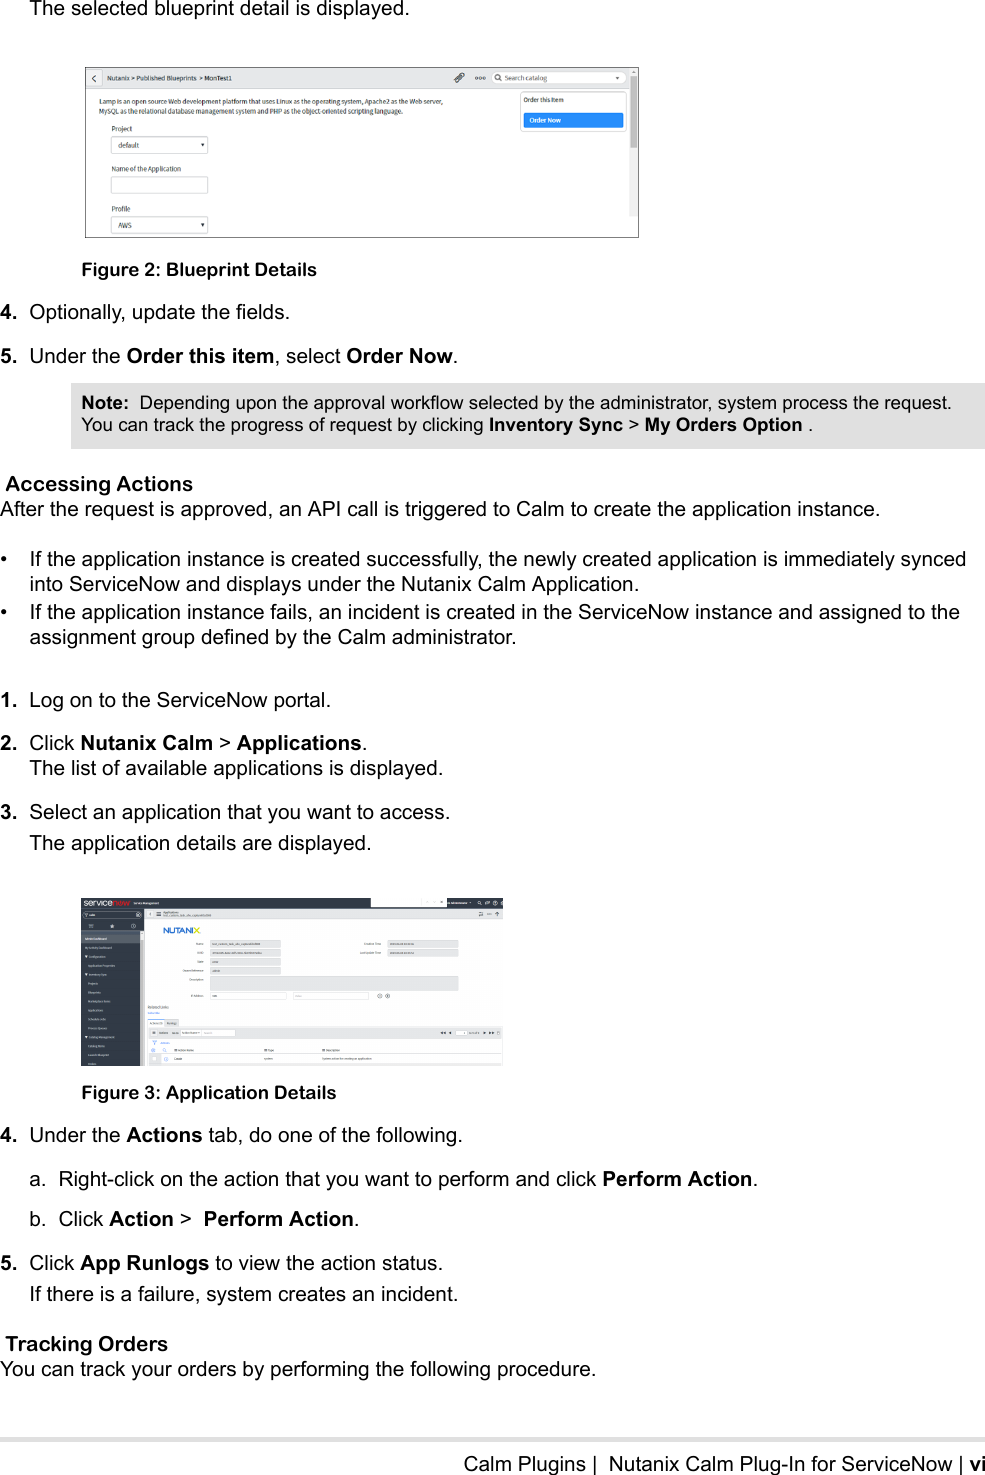 Page 6 of 9 - ServiceNow Calm Plug-In User Guide Calm-Service Now-Plug-In-User-Guide-v1.0